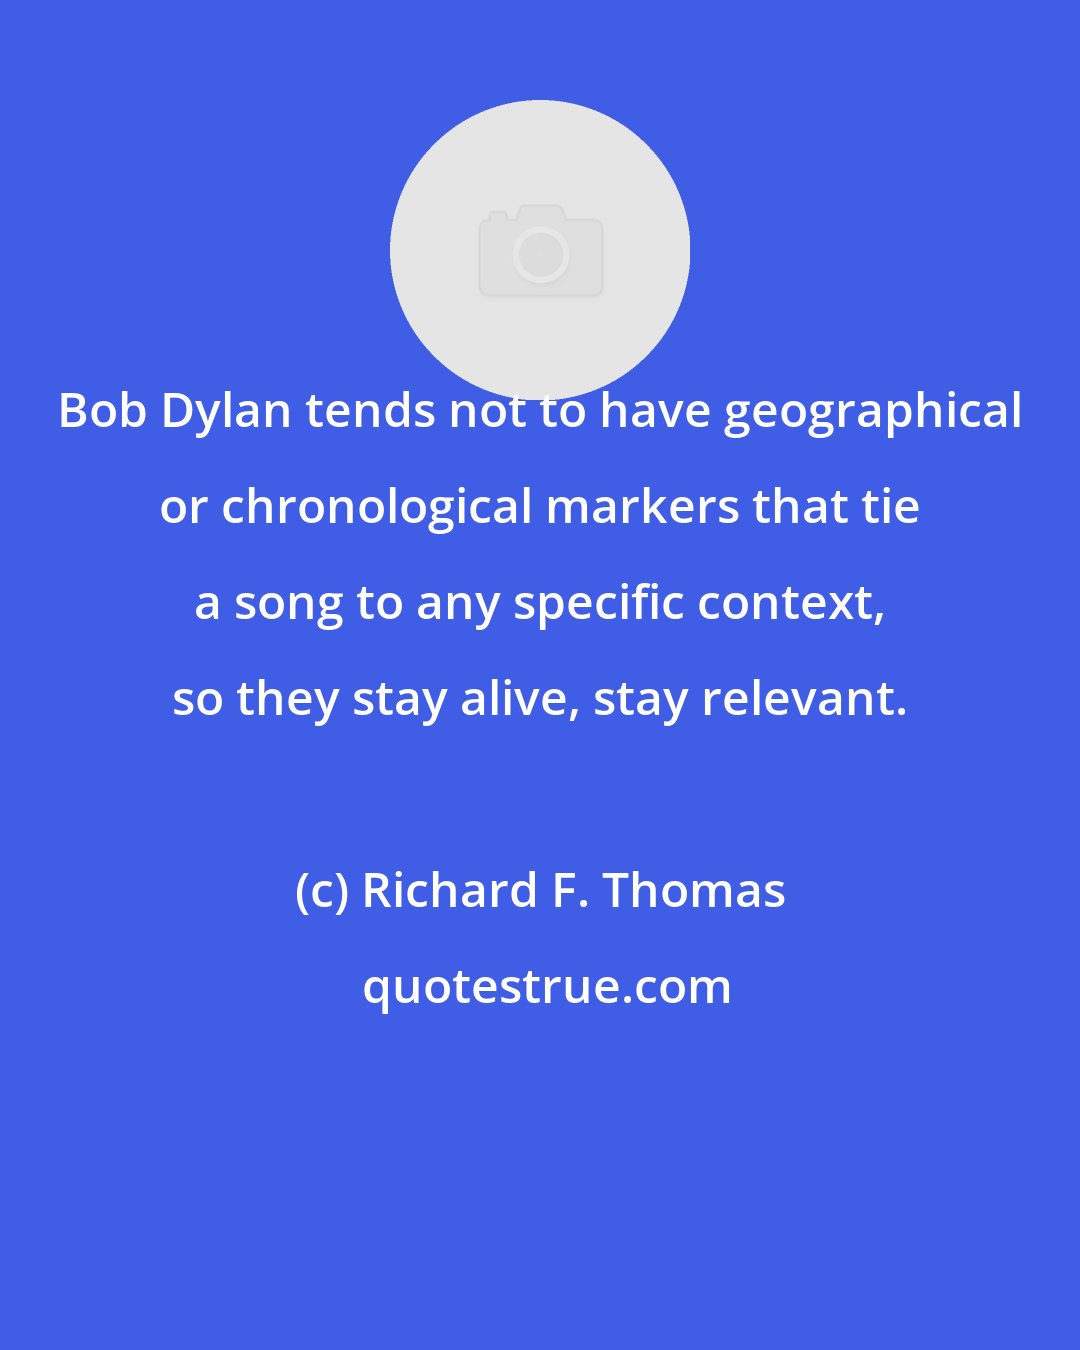 Richard F. Thomas: Bob Dylan tends not to have geographical or chronological markers that tie a song to any specific context, so they stay alive, stay relevant.